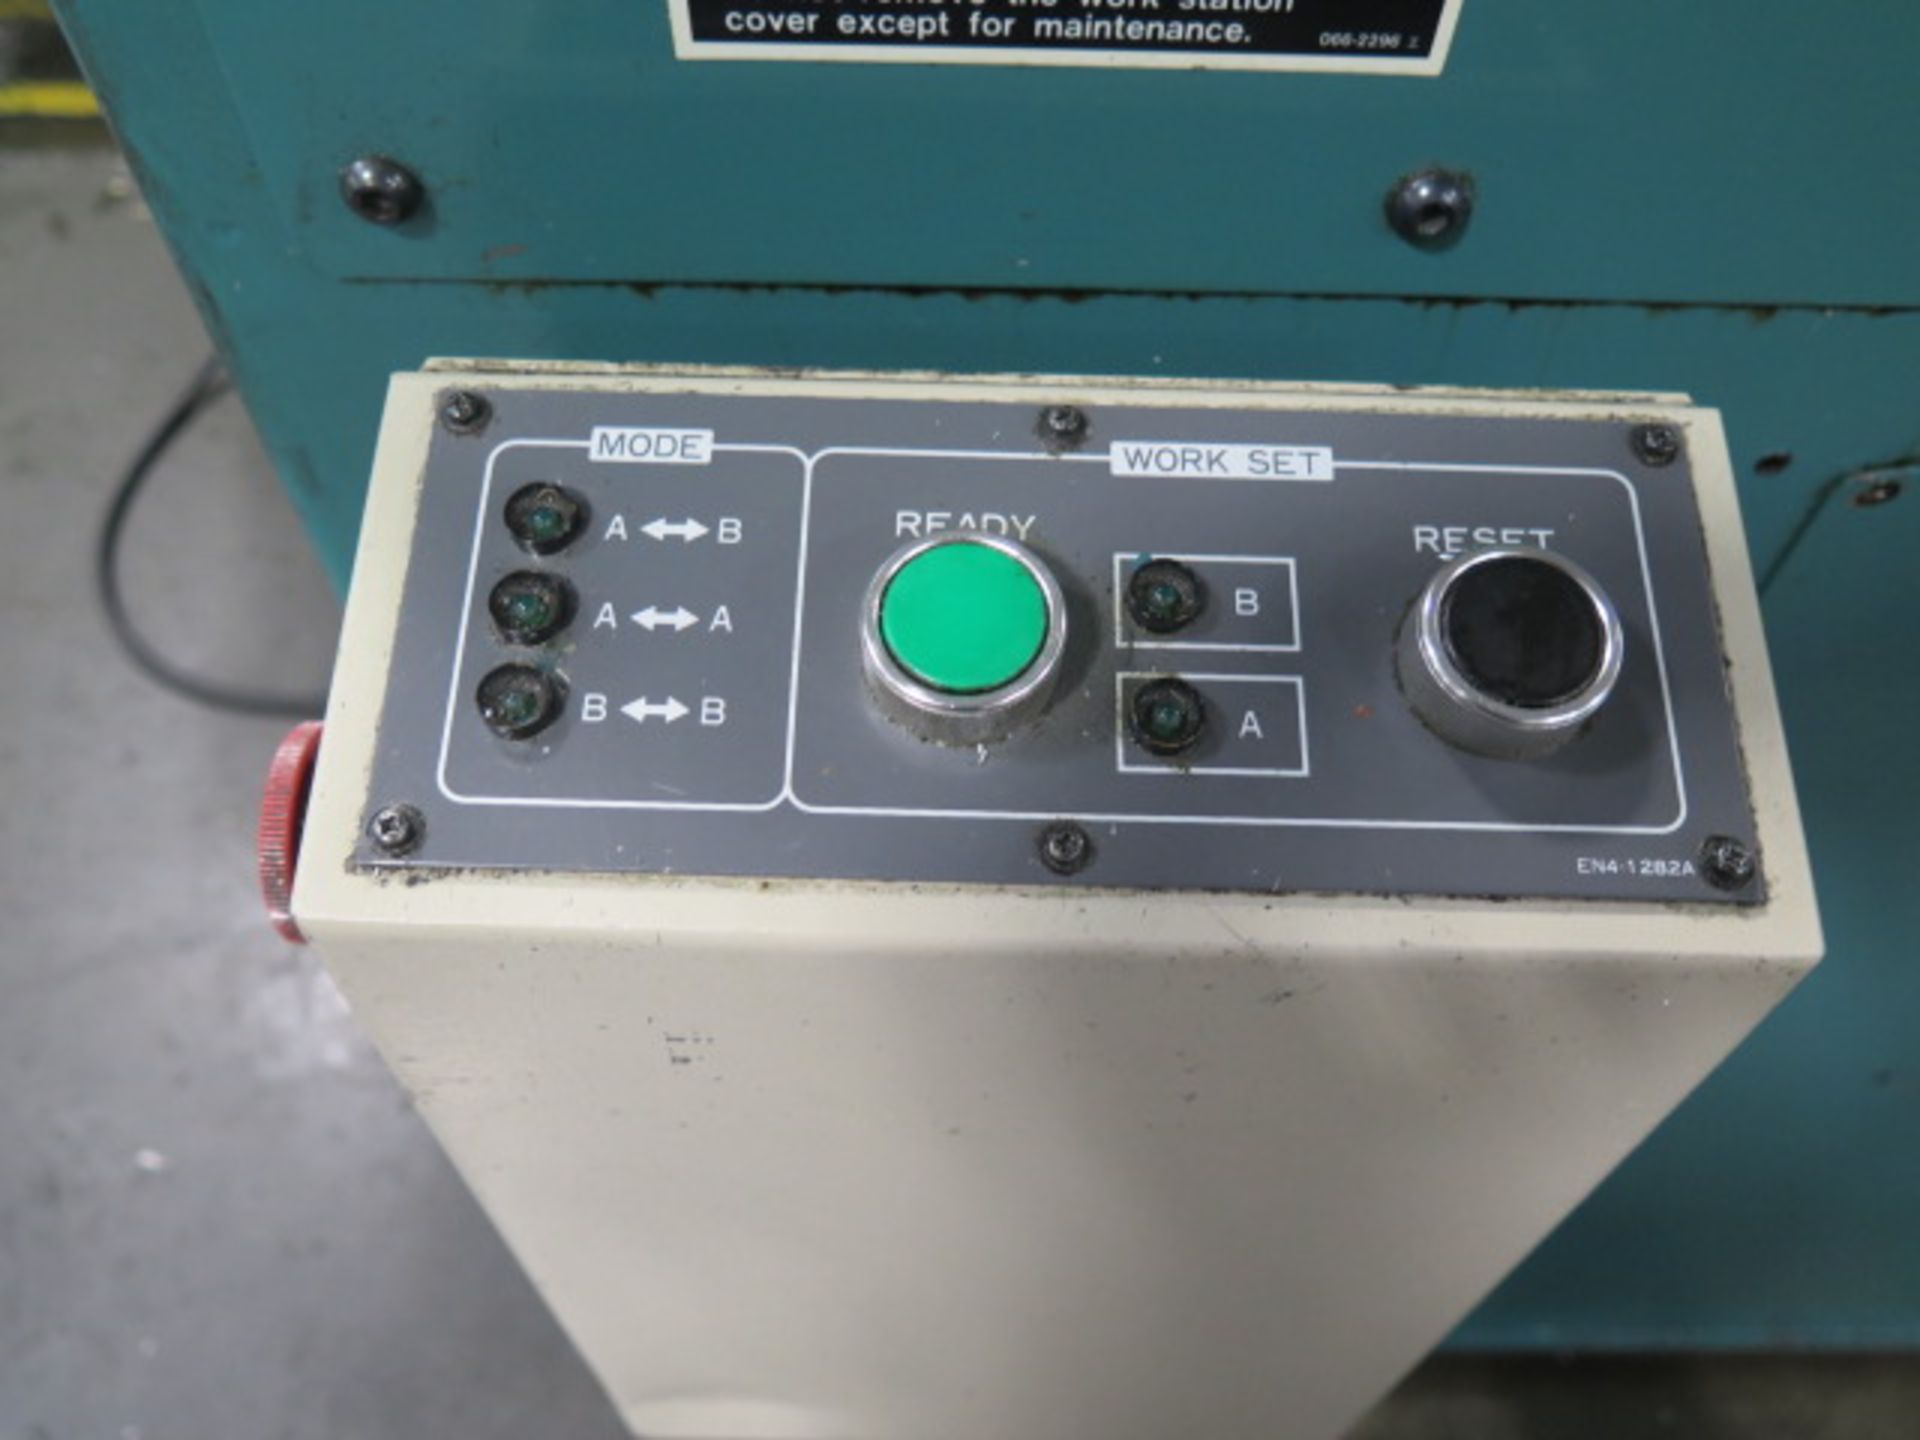 1997 Matsuura RA-IV F 2-Pallet CNC Vertical Machining Center s/n 970712531 (HAS “Y” AXIS PROBLEM) w - Image 12 of 24